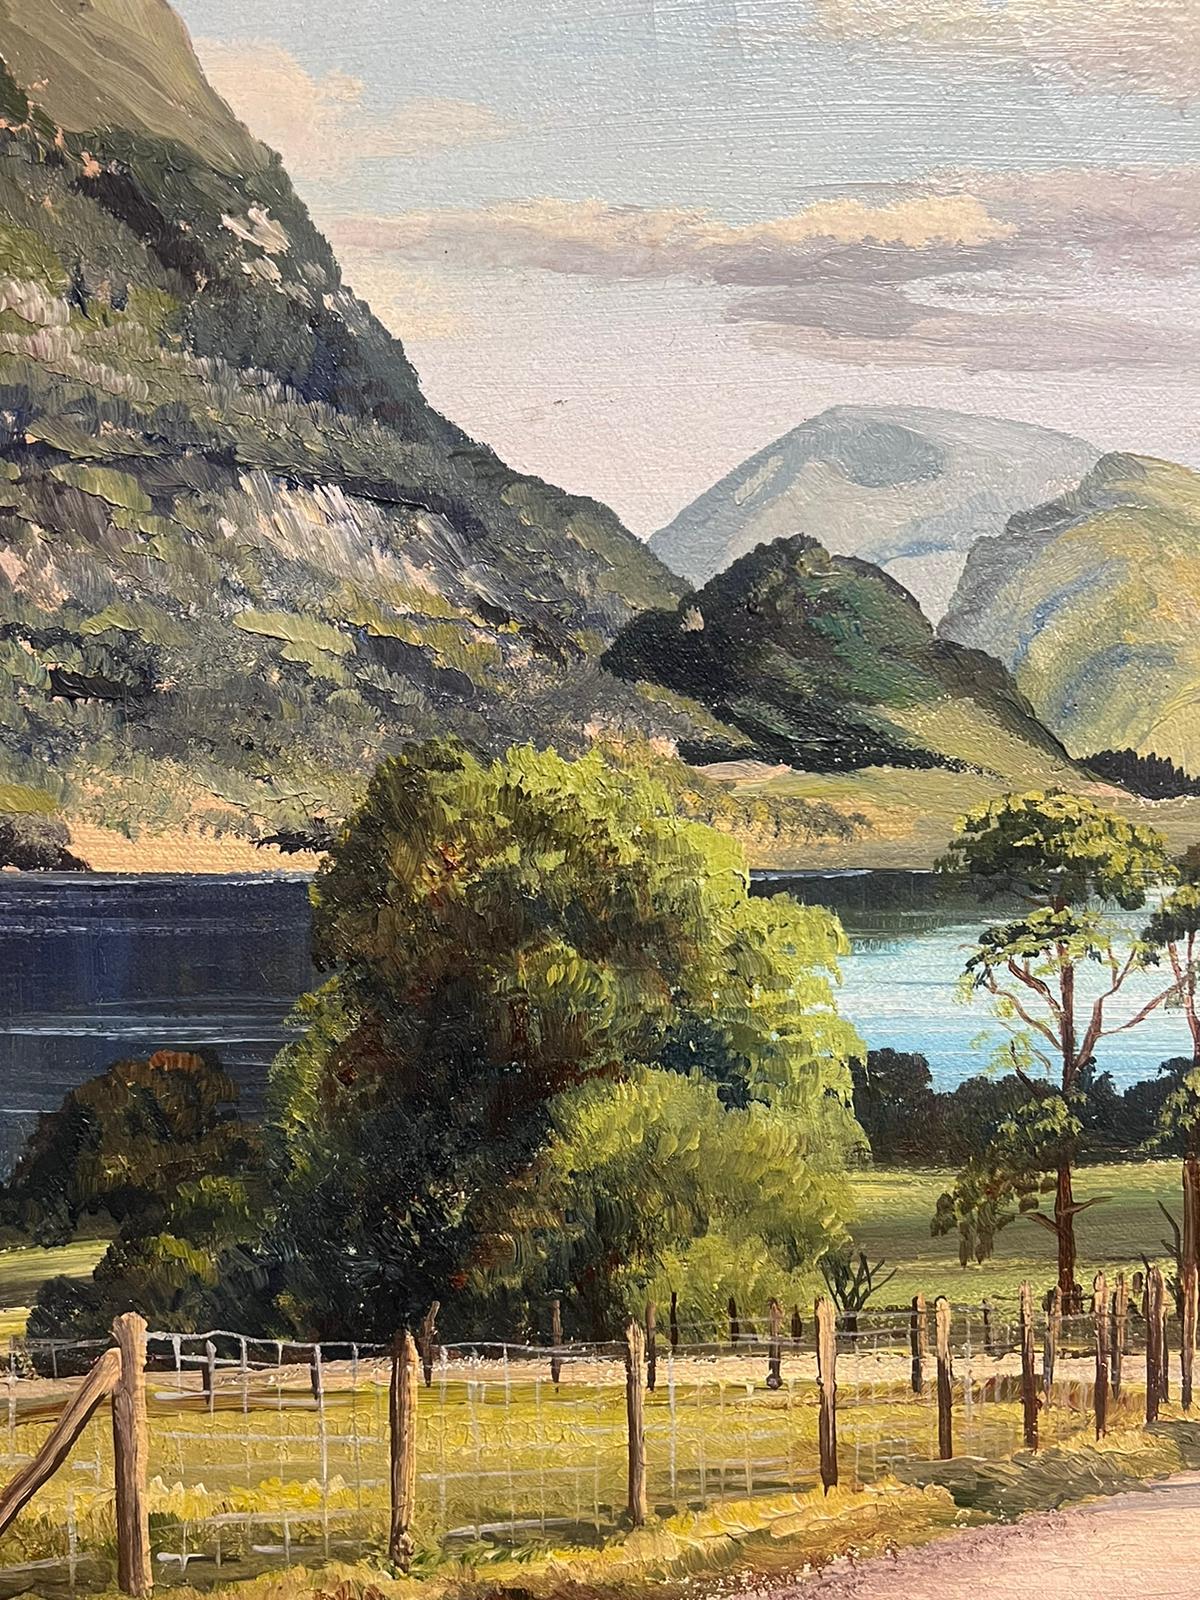 Ullswater
Alan B. Charlton (British, 20th century)
oil on canvas, framed
framed: 23 x 33 inches
canvas: 20 x 30 inches
inscribed verso
provenance: private collection
condition: very good and sound condition 

Ullswater is the second-largest lake in